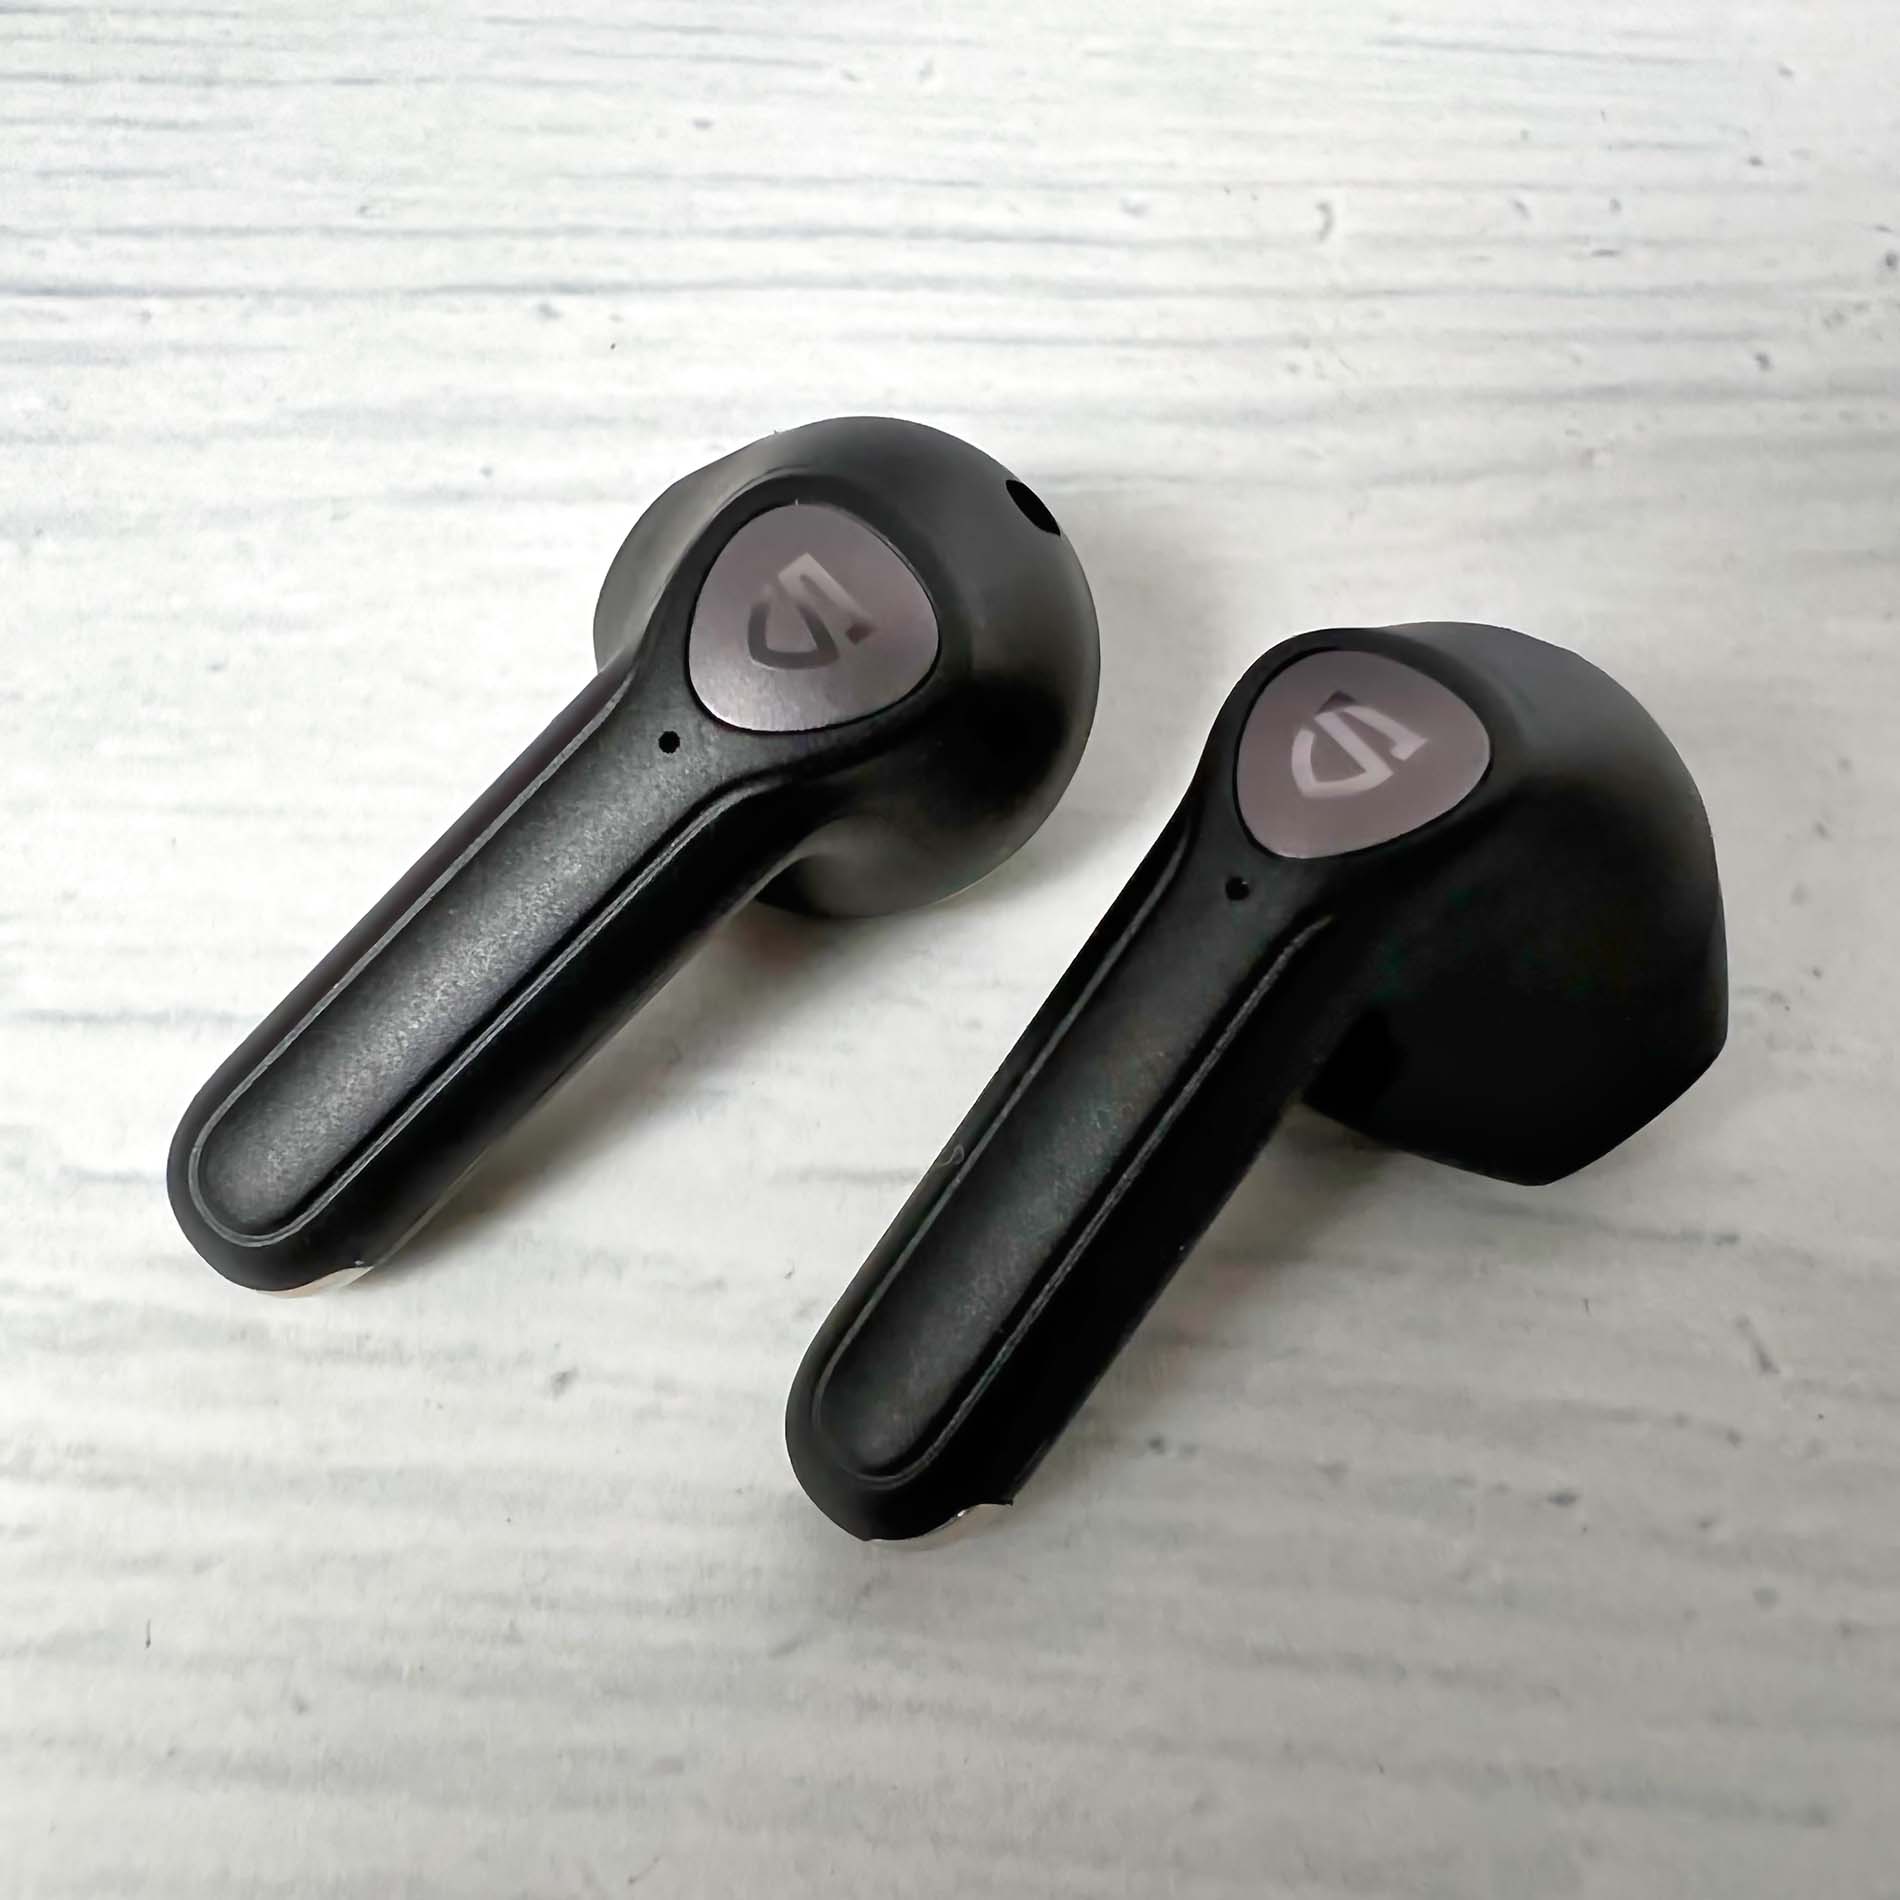 Thank you Sloppy loose the temper Review: Soundpeats Air3 vs. Apple AirPods 3